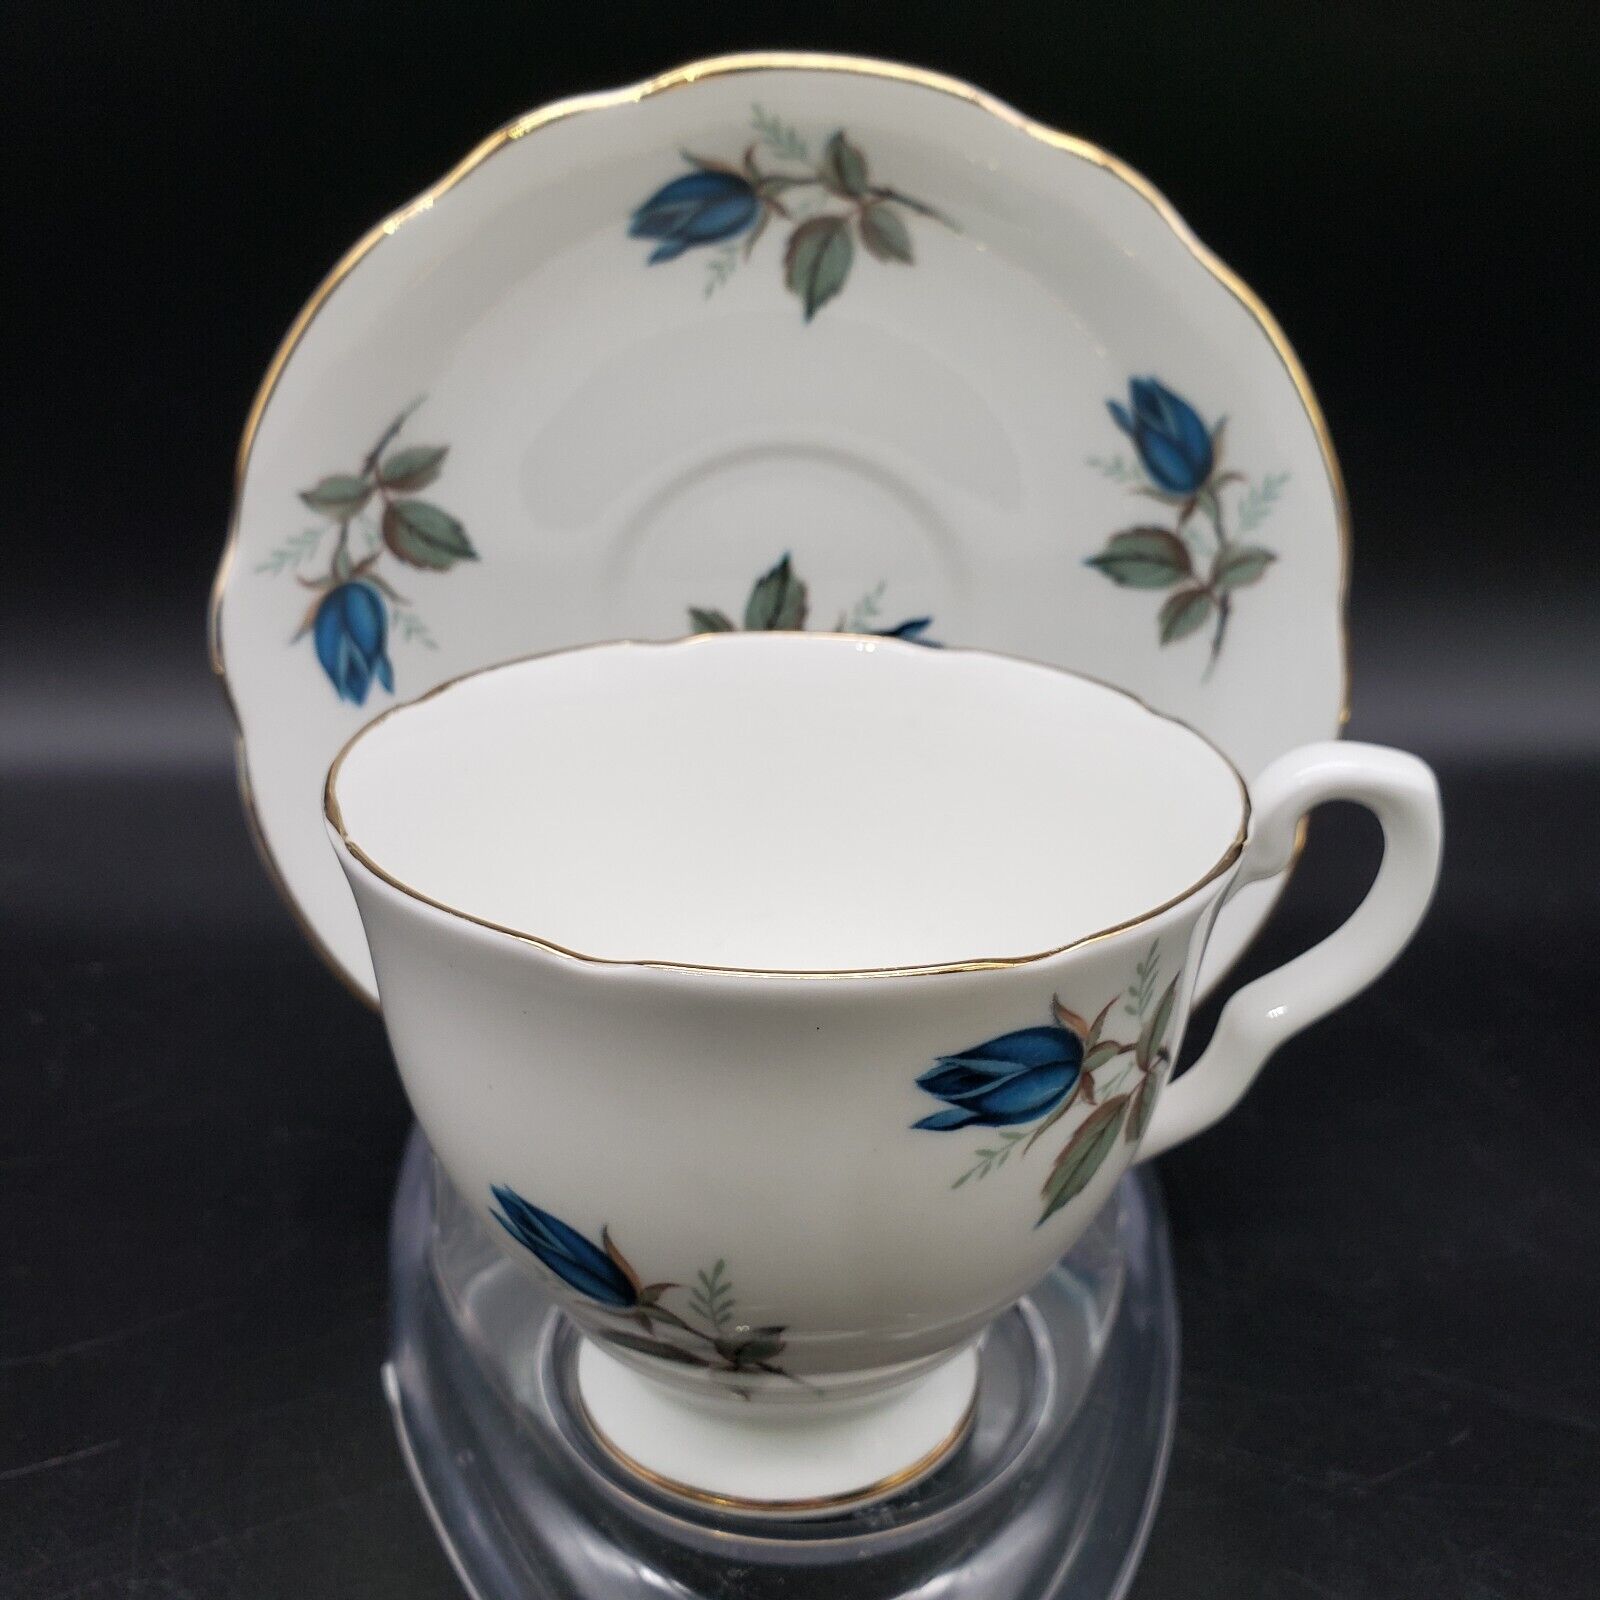 Vintage Royal Imperial Finest Bone China Footed Cup and Saucer Blue Rose England